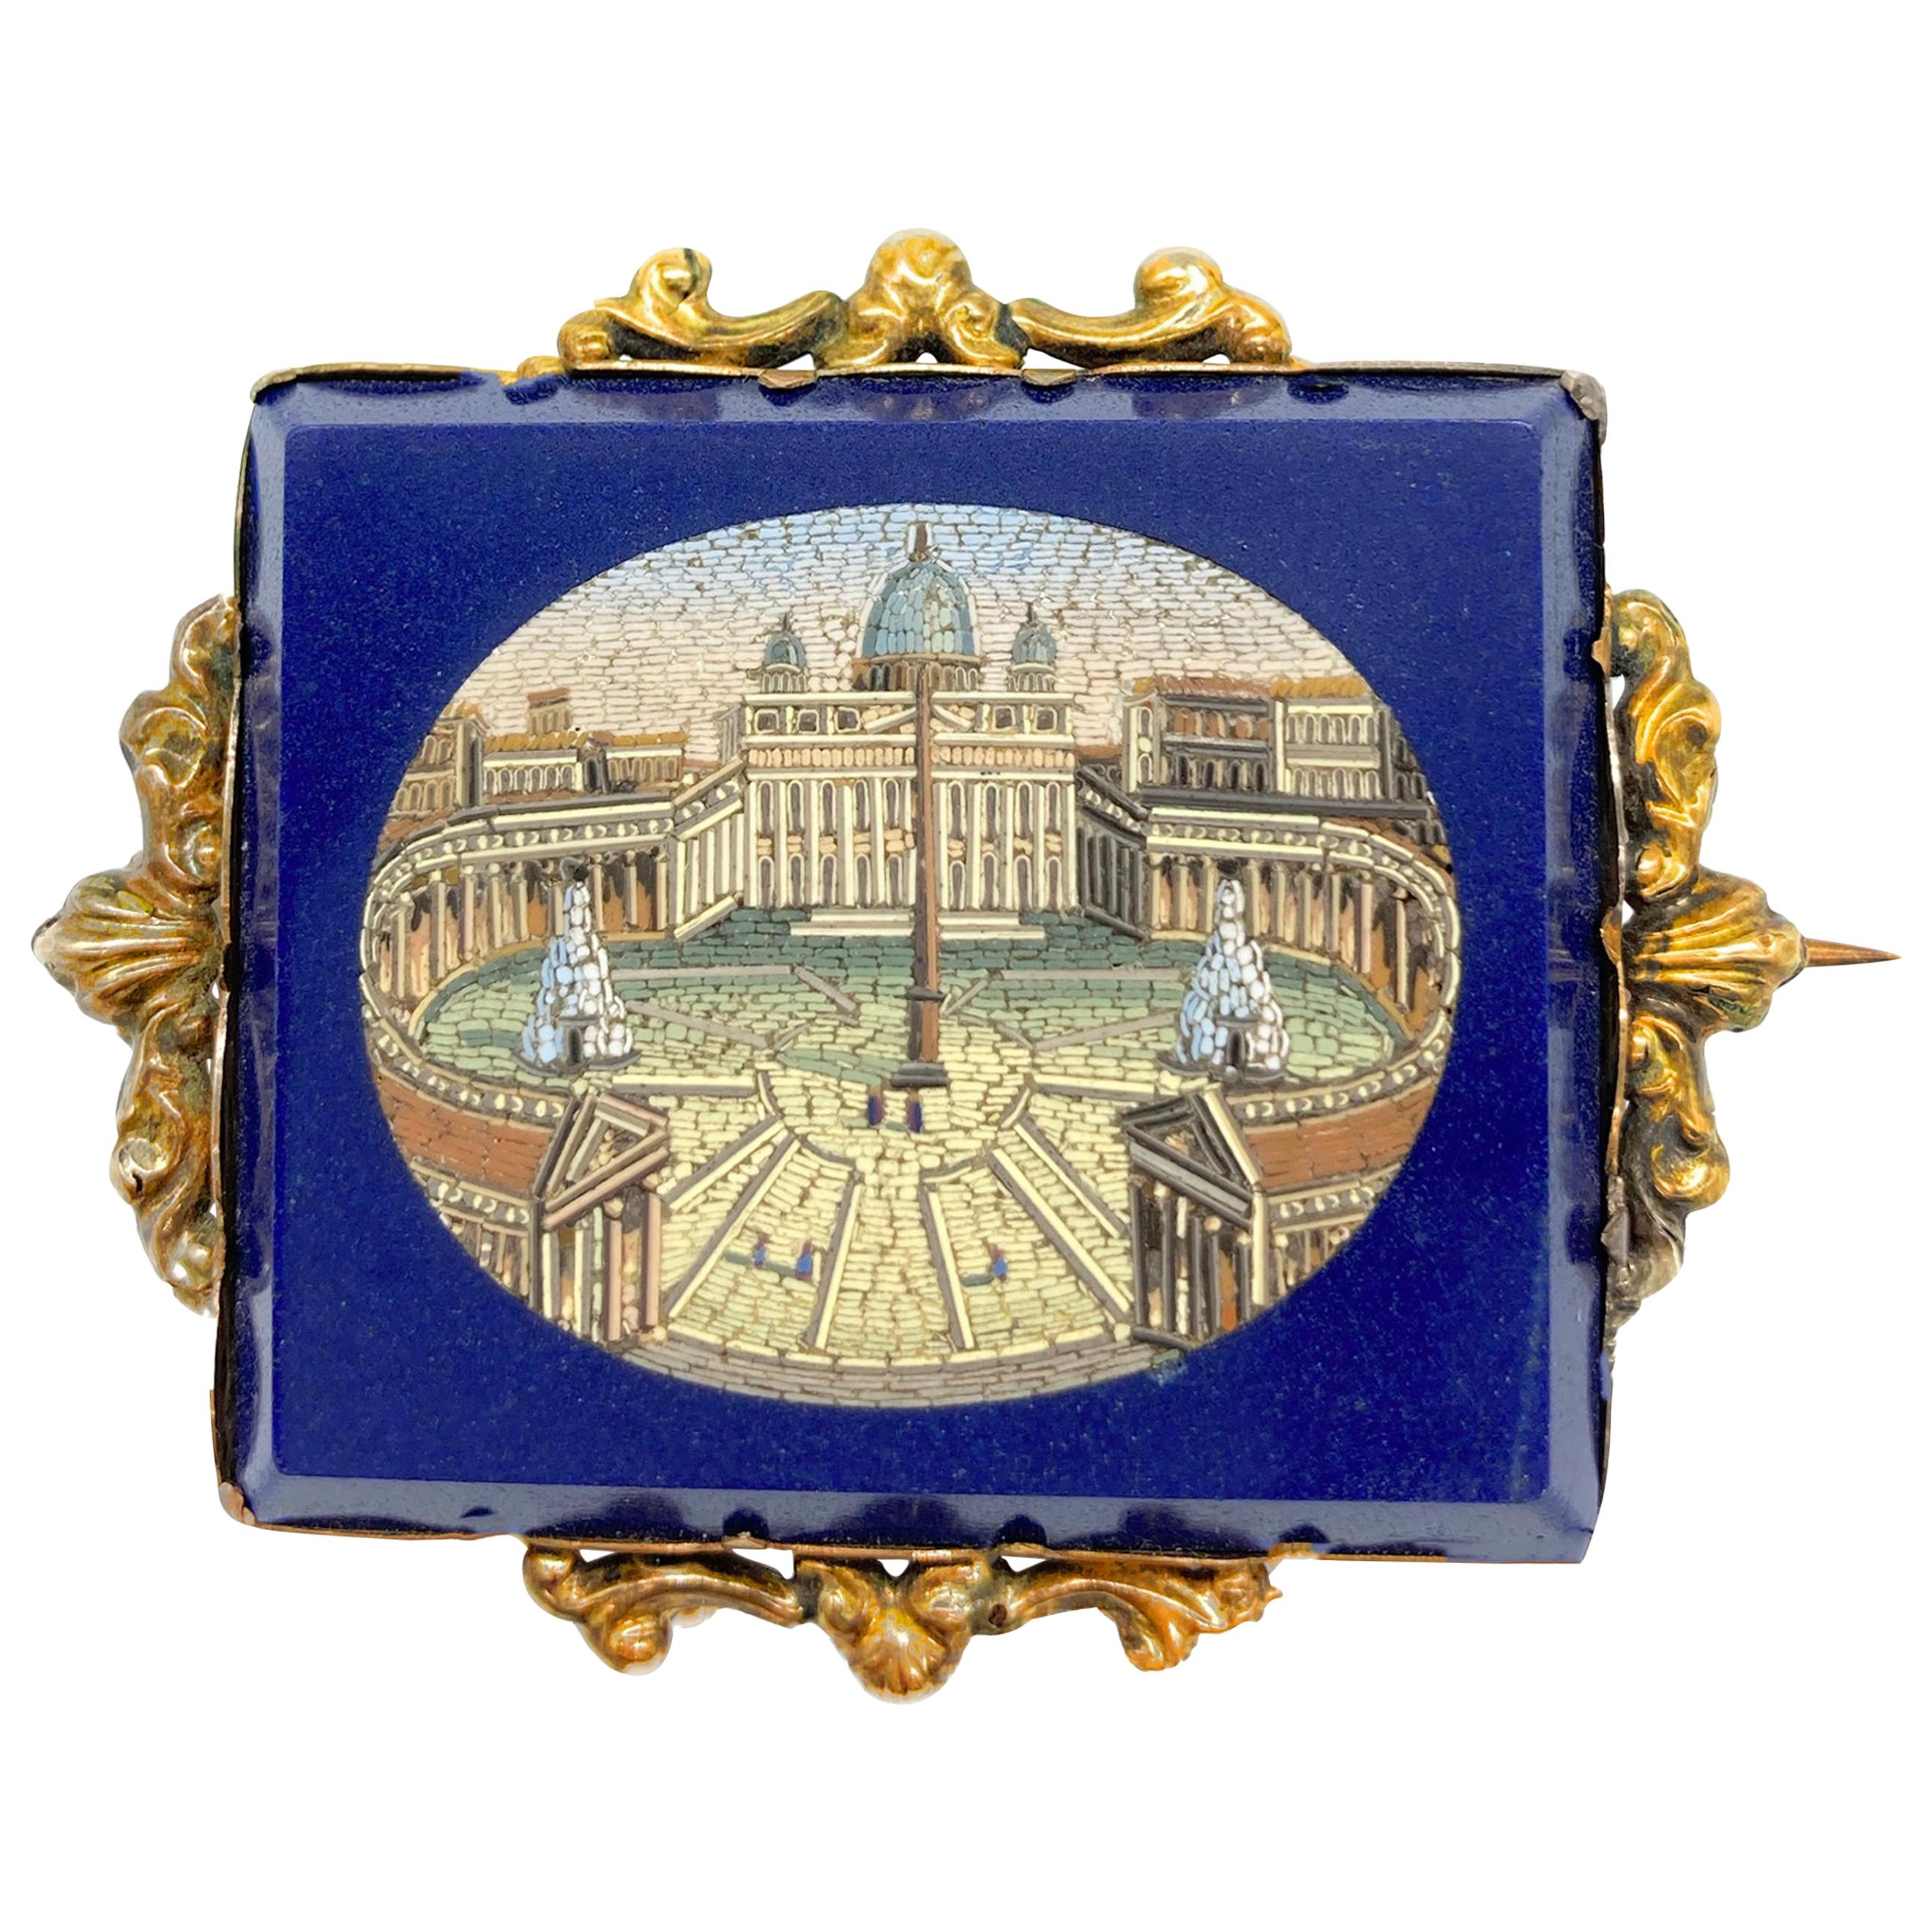 Antique Micromosaic St. Peter’s Square Brooch